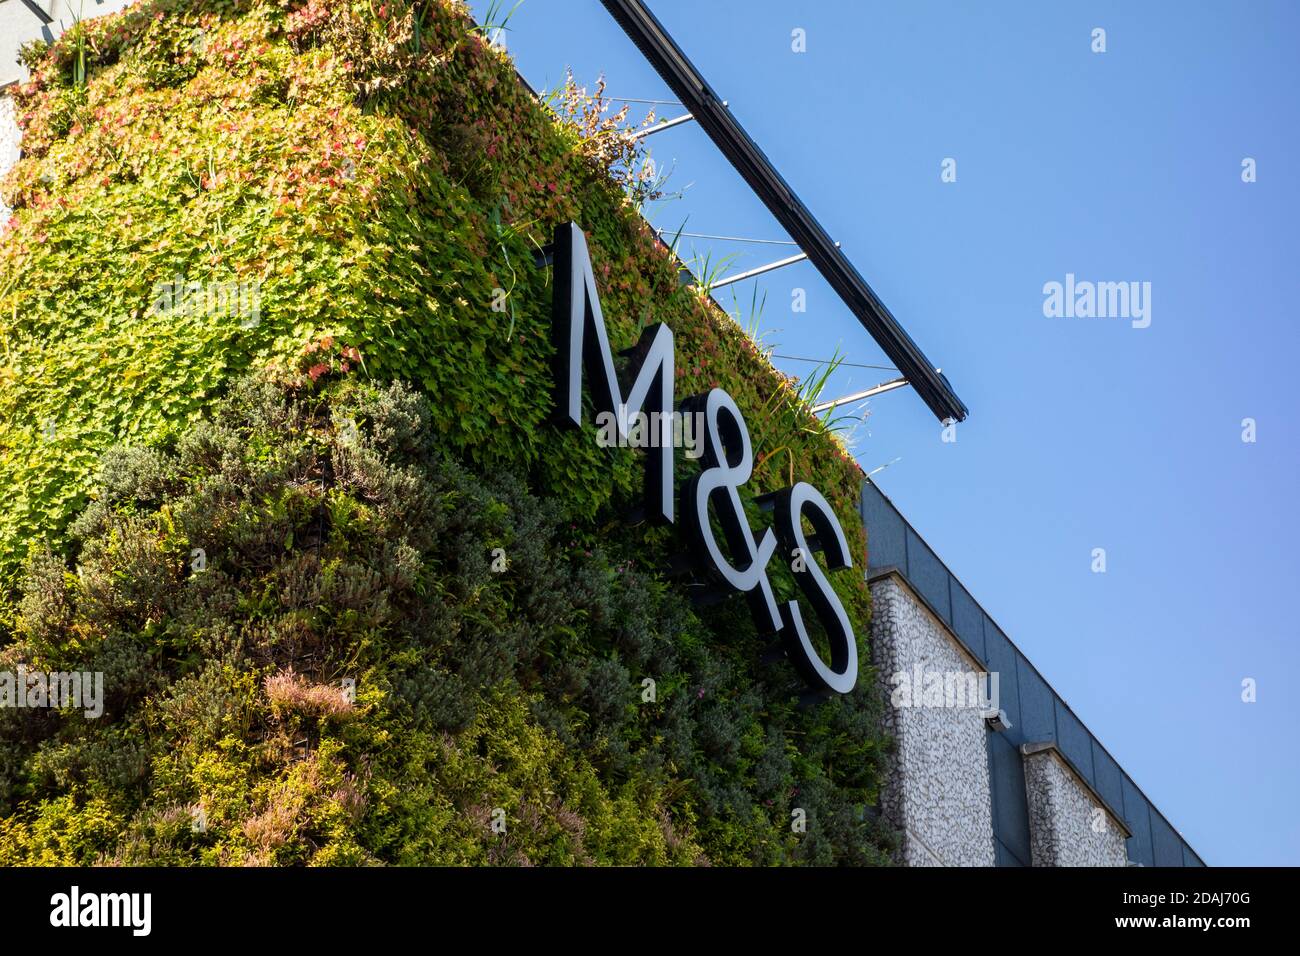 M&S Marks & Spencer, sign and logo with a living wall background Stock Photo